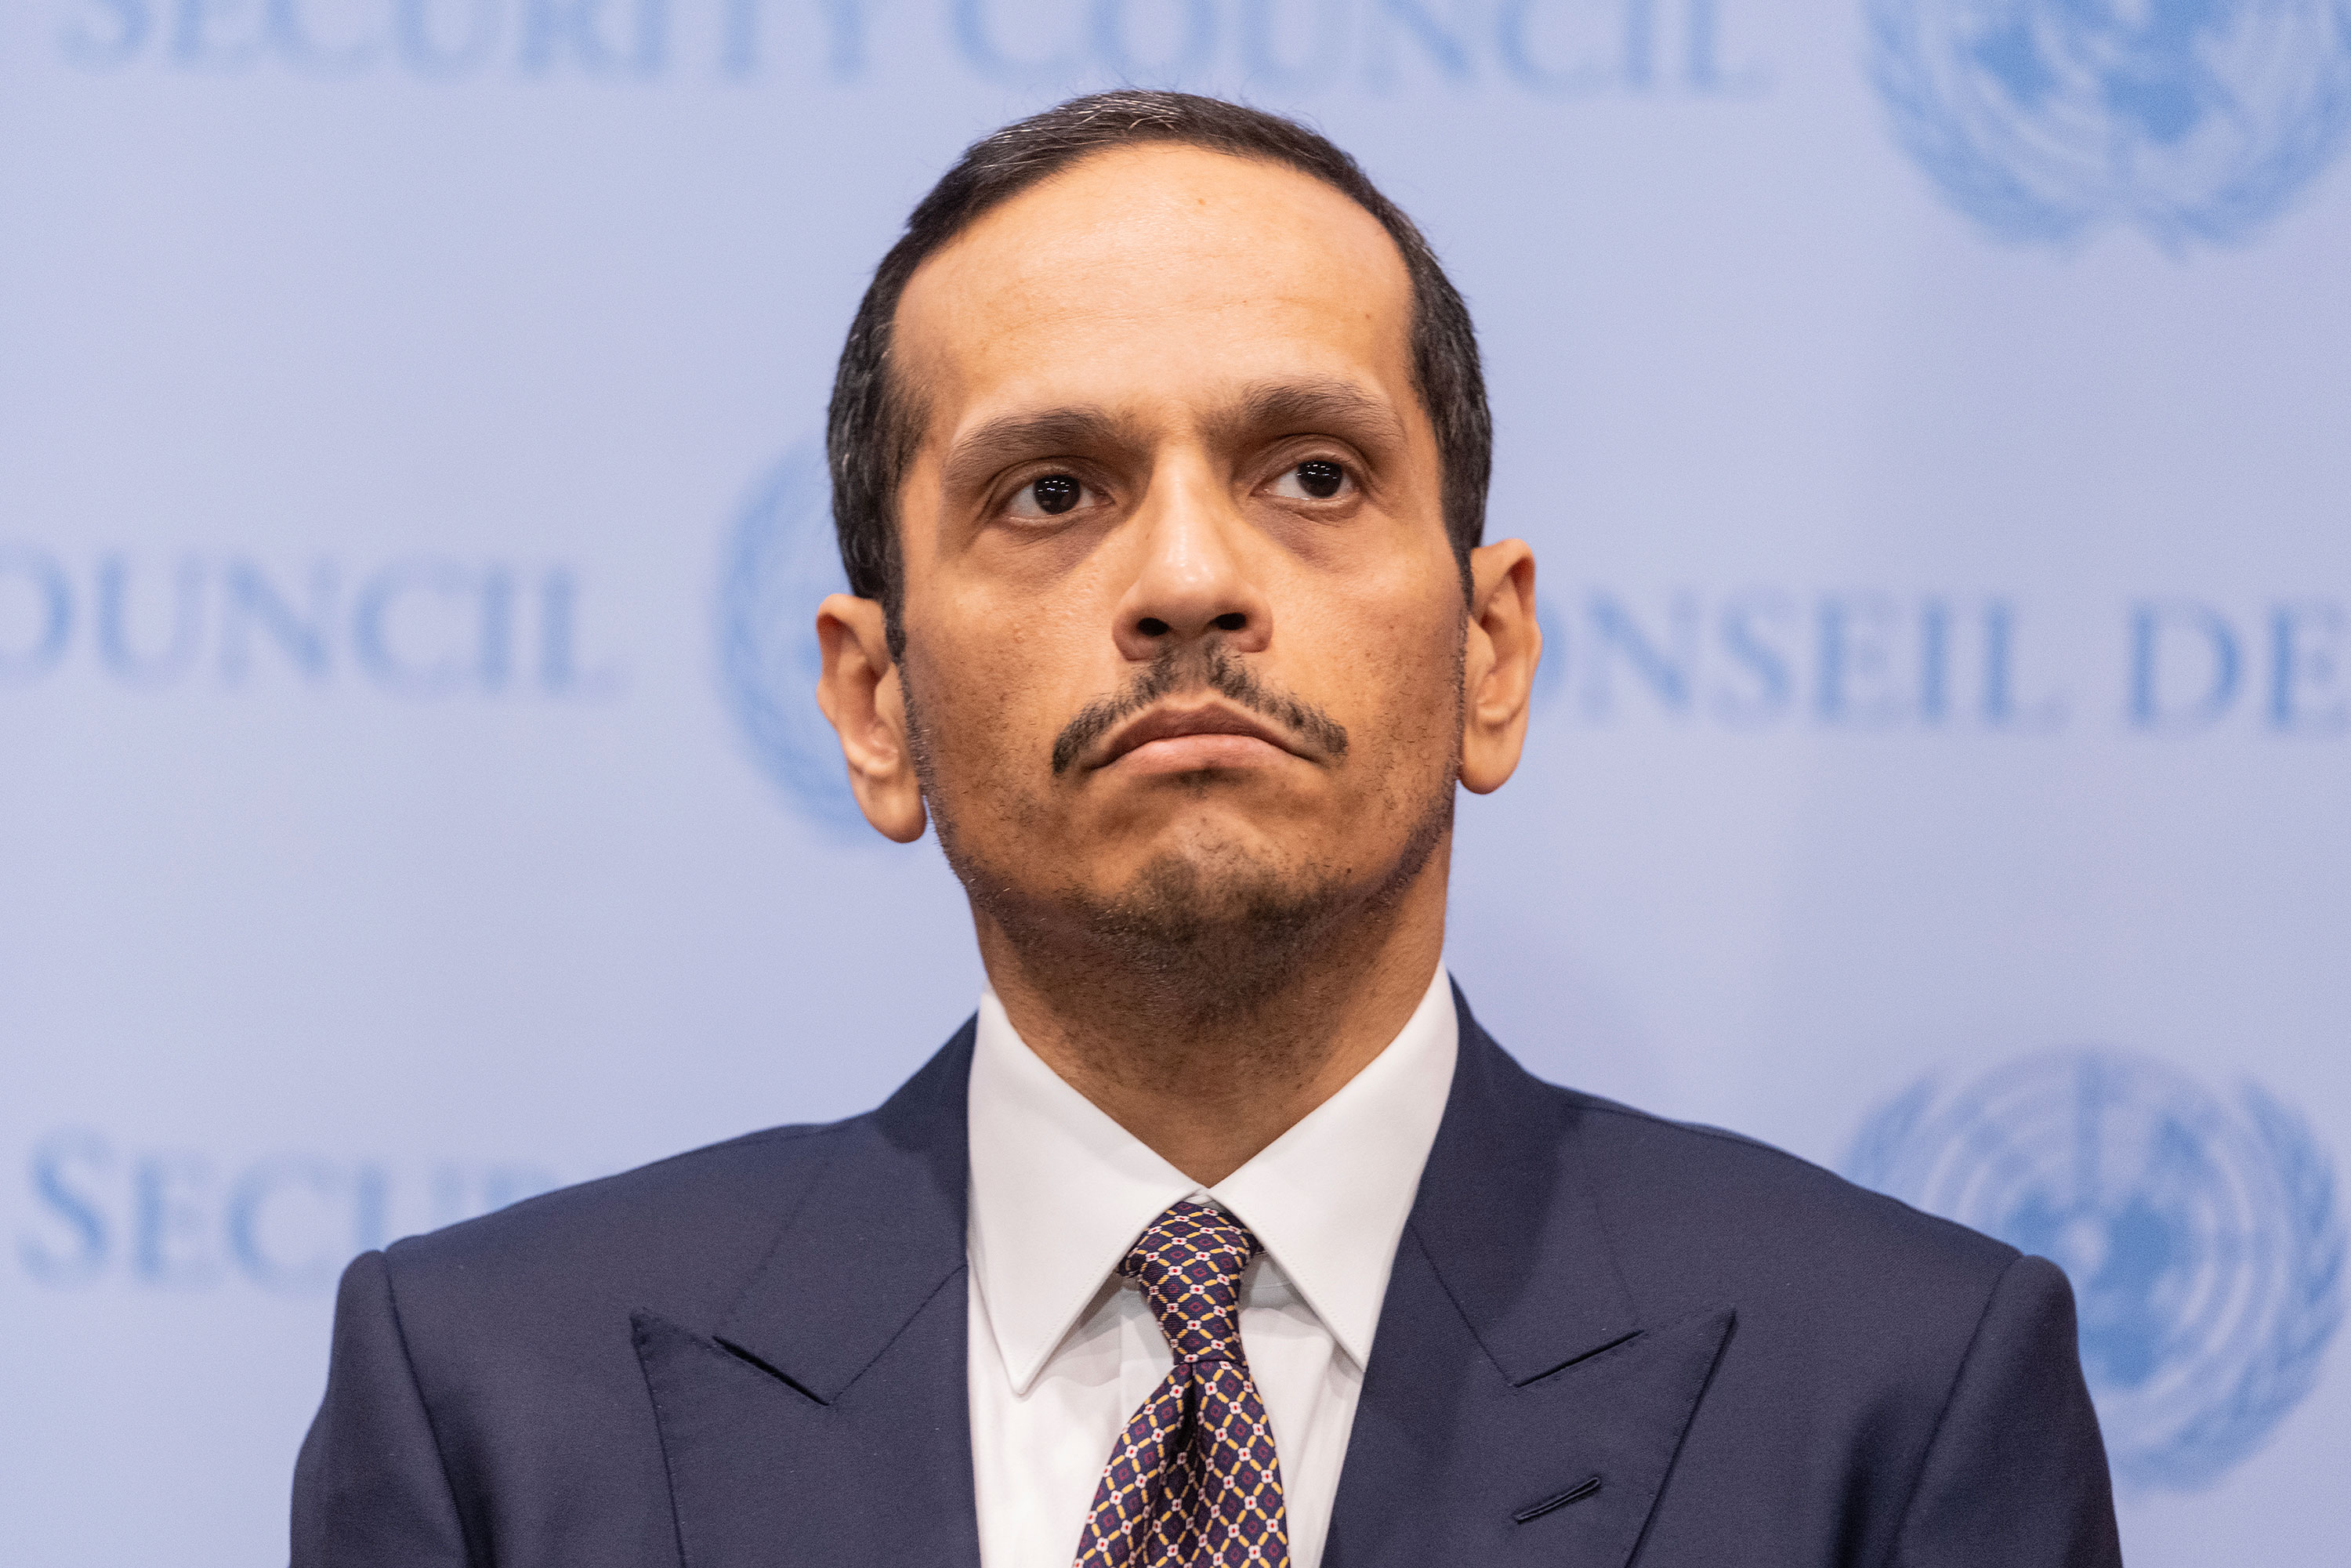 Qatari Prime Minister and Minister of Foreign Affairs Sheikh Mohammed bin Abdulrahman bin Jassim Al-Thani attends a press briefing at UN Headquarters in New York on November 29. 